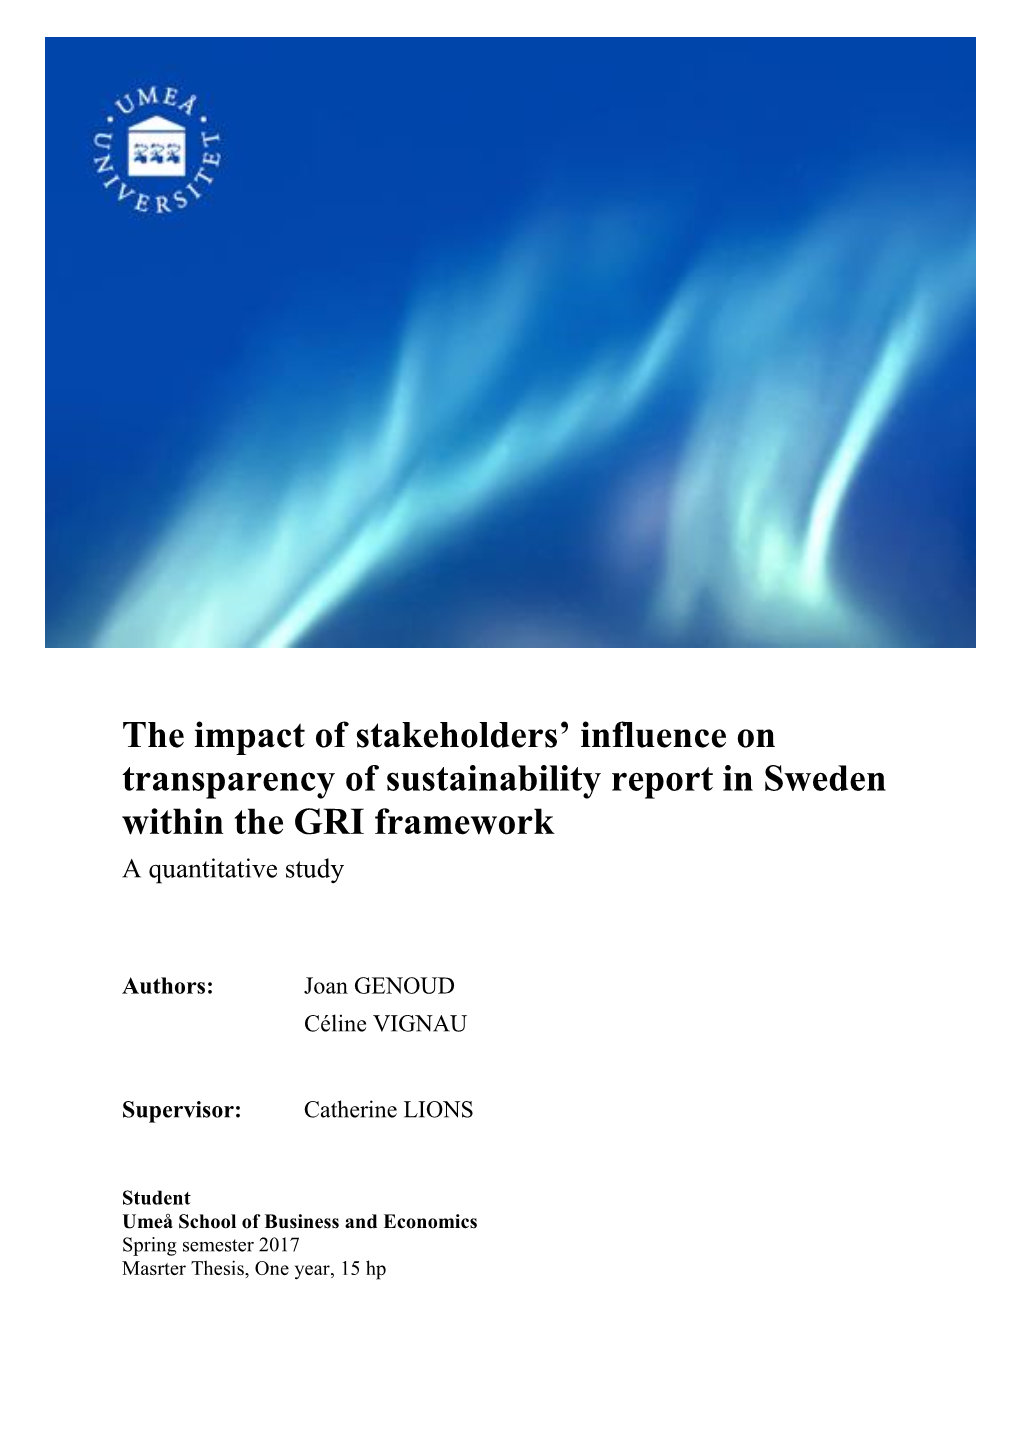 The Impact of Stakeholders' Influence on Transparency of Sustainability